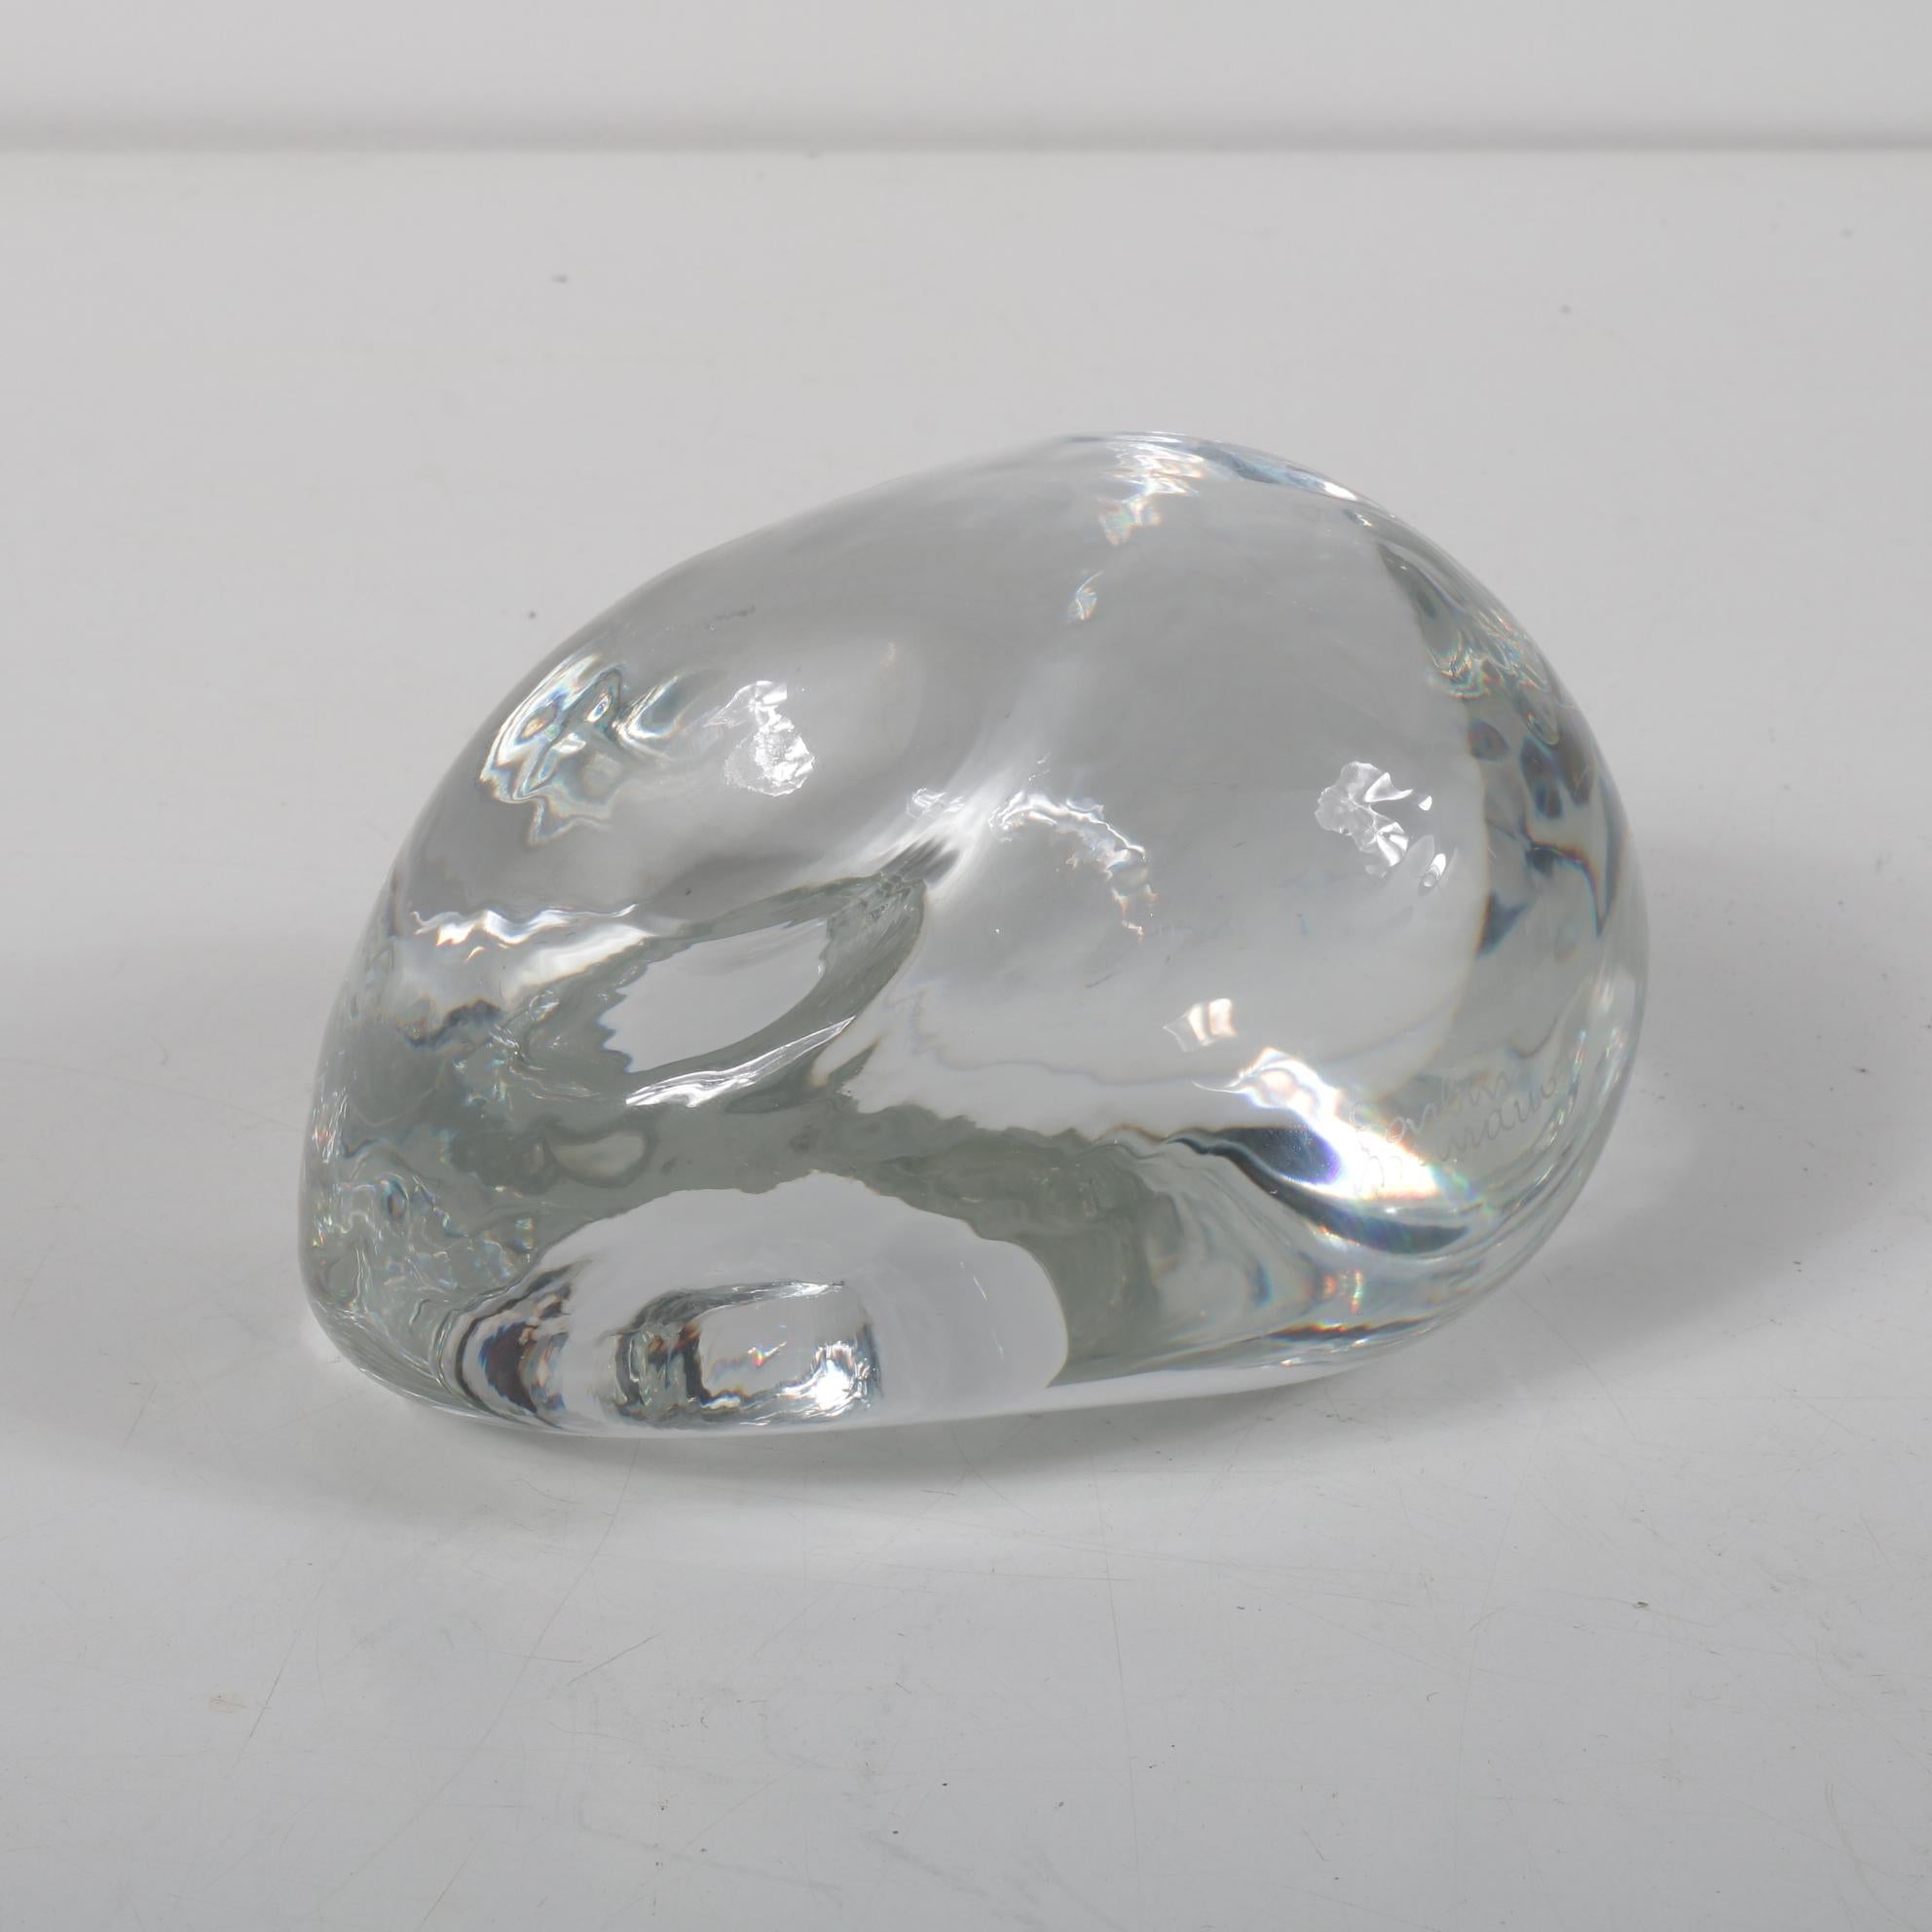 A beautiful small glass orb, designed and signed by Alfredo Barbini, made in Italy.

This wonderful piece is made of the highest quality clear glass, shaped as a small stone with beautiful curves and a very smooth finish. It will beautifuly